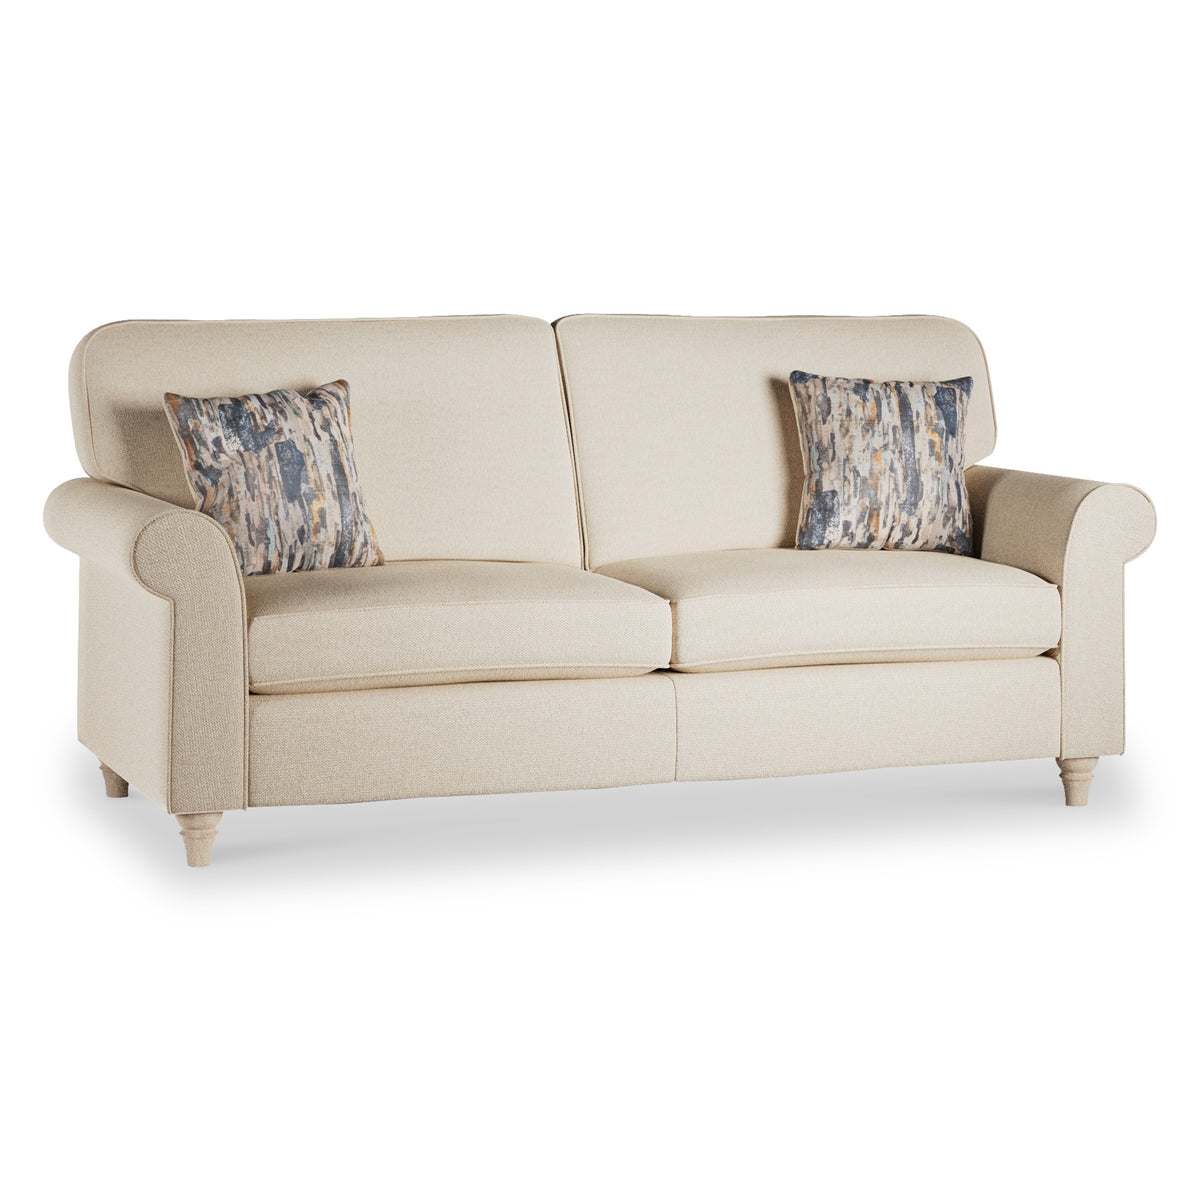 Jude Clay 3 Seater Sofa from Roseland Furniture